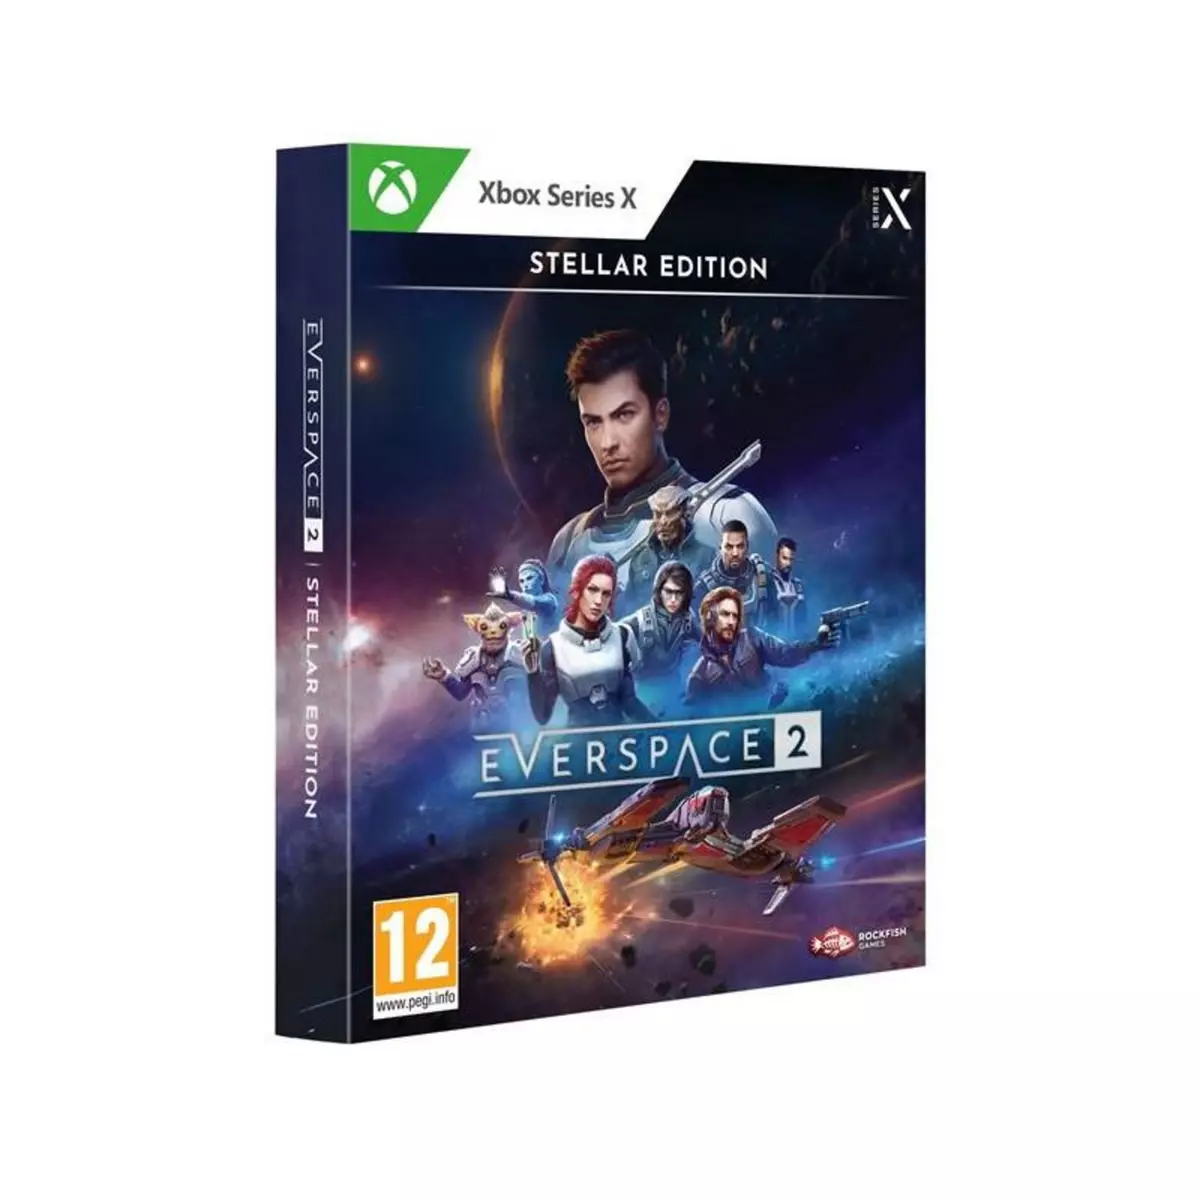 Just for games Everspace 2 Stellar Edition Xbox Series X